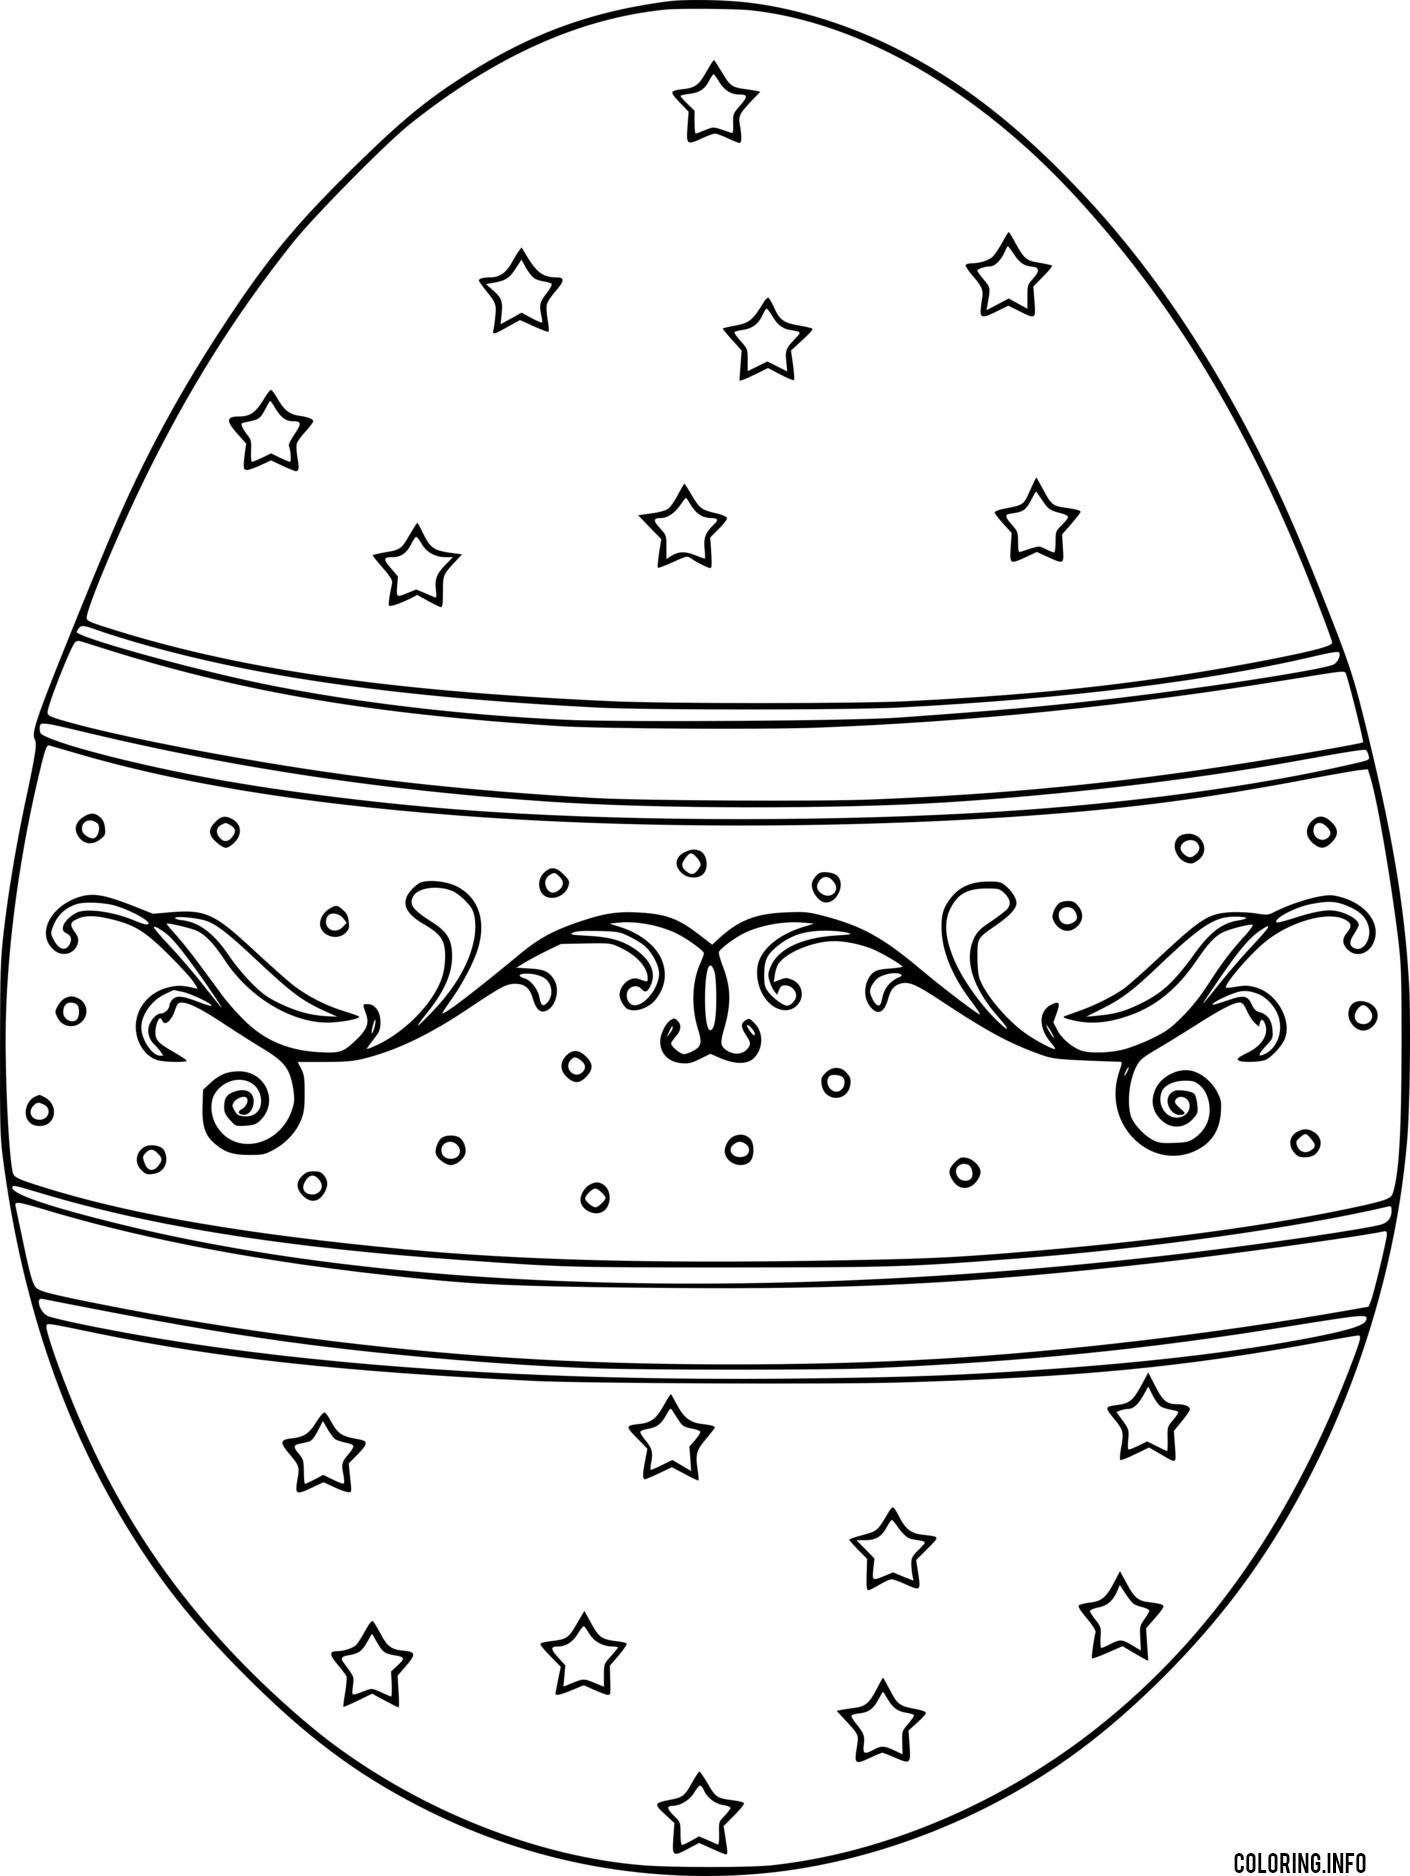 Small Star Pattern Easter Egg coloring